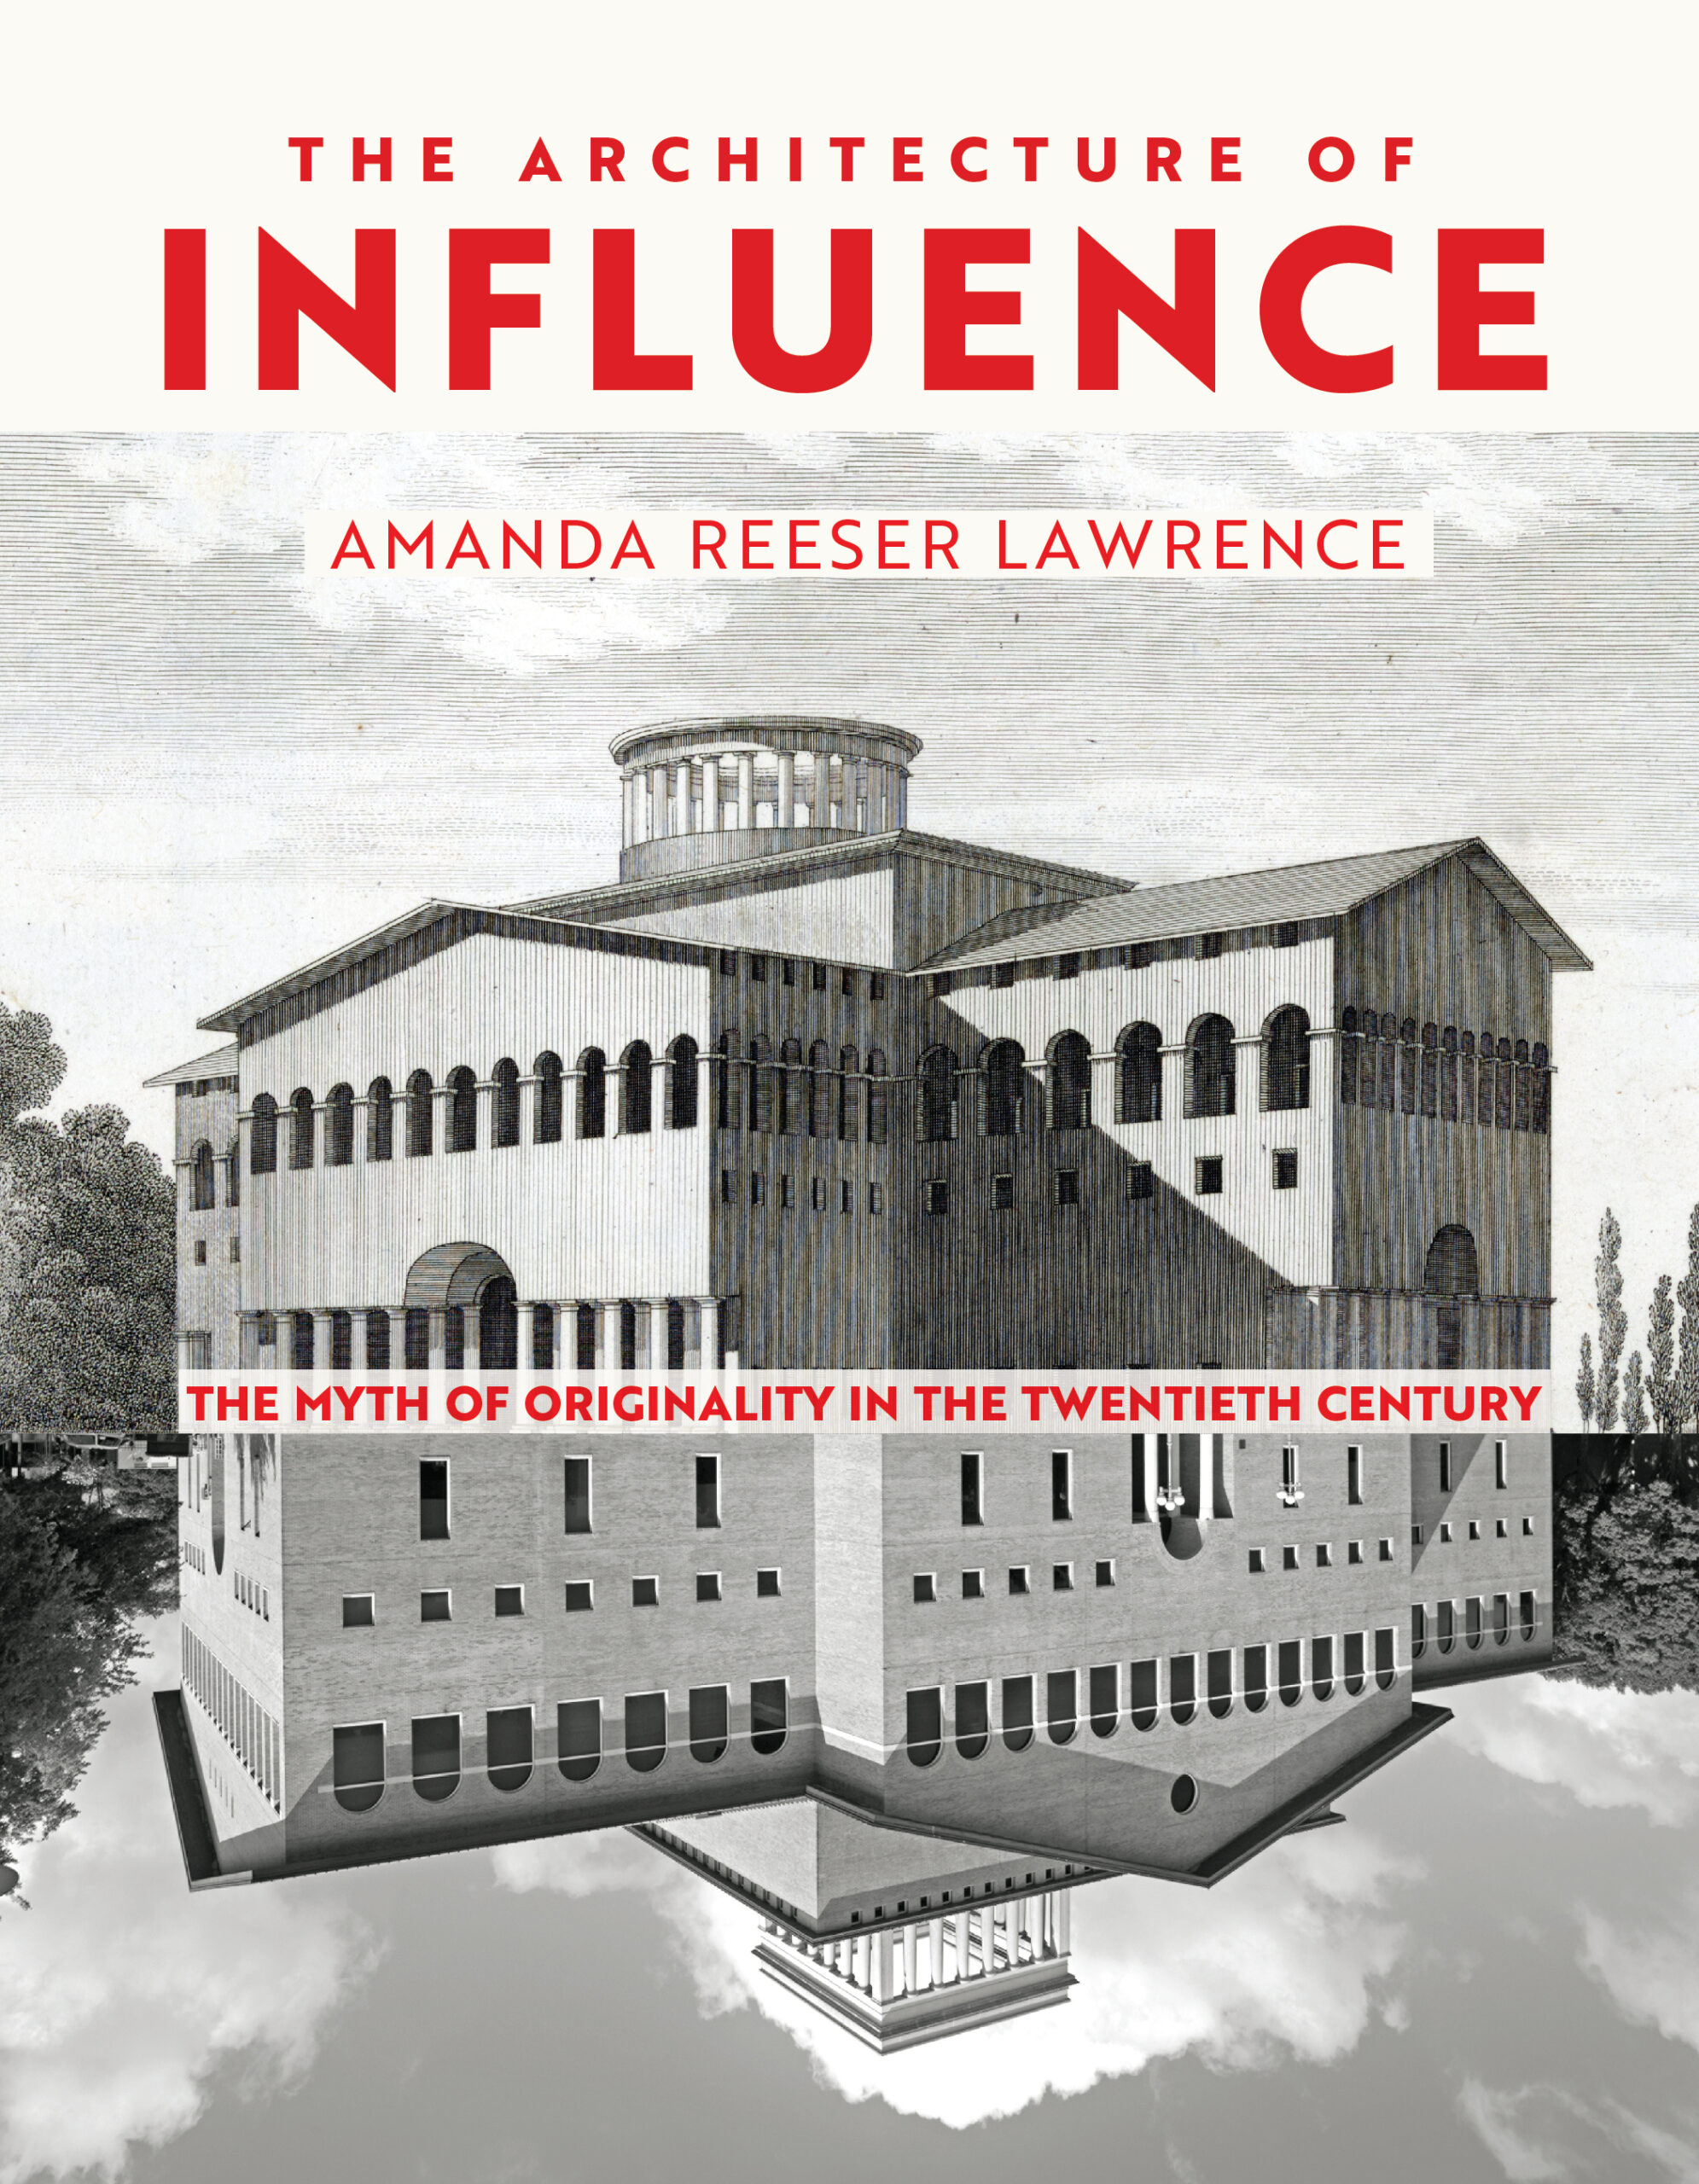 Q+A: Amanda Reeser Lawrence on the myths that shroud the real genius of architecture